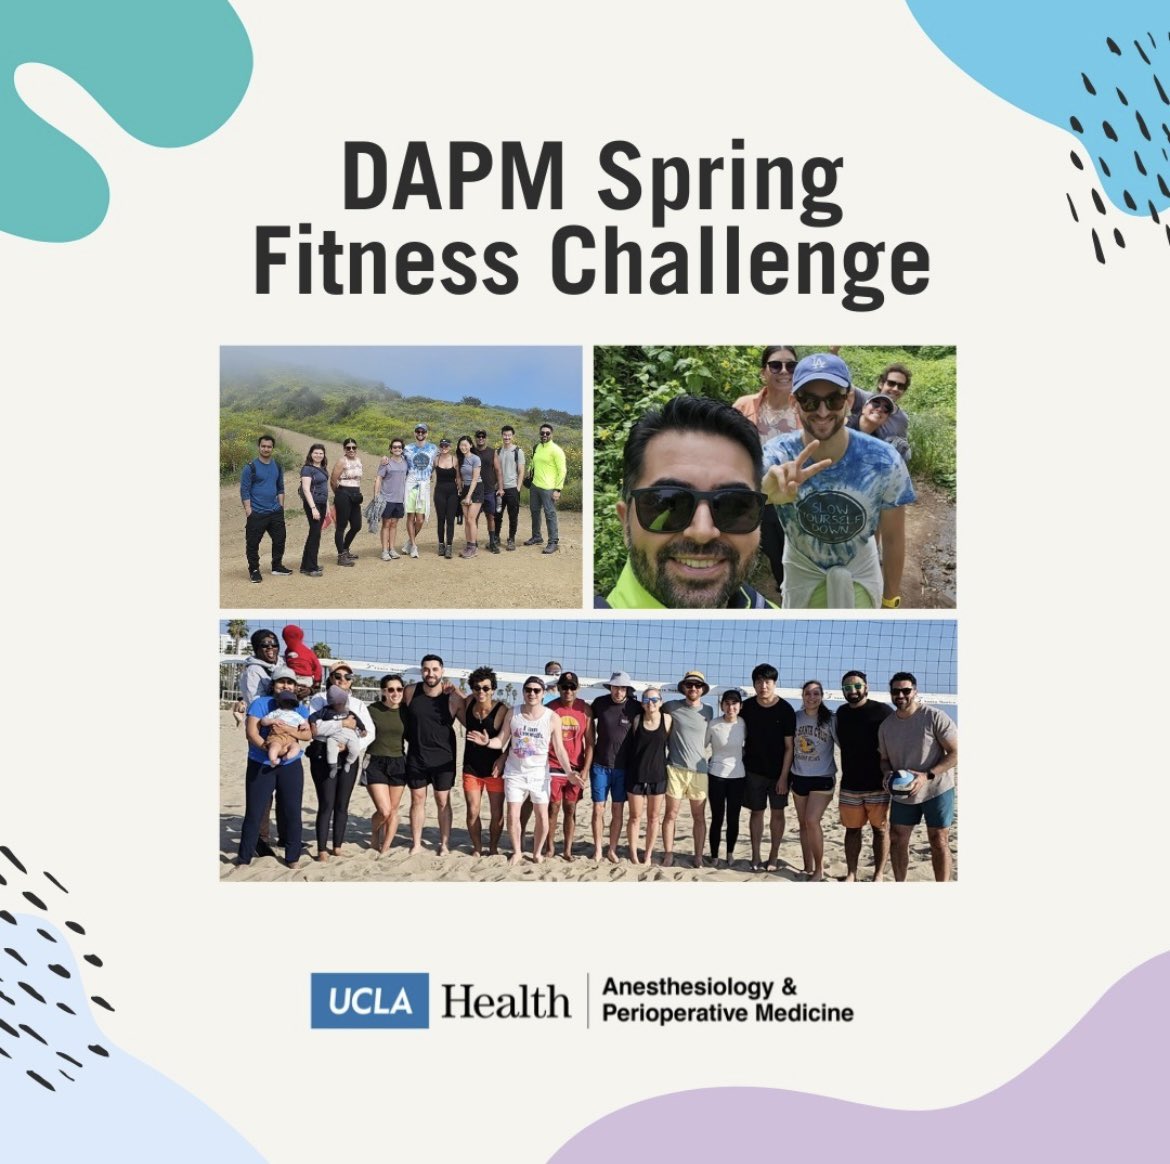 Our department is more than halfway through our #DAPMFitnessChallenge24! Many of our team came together this past weekend for a beautiful hike and a fun beach volleyball game. #DAPMActiveApril24